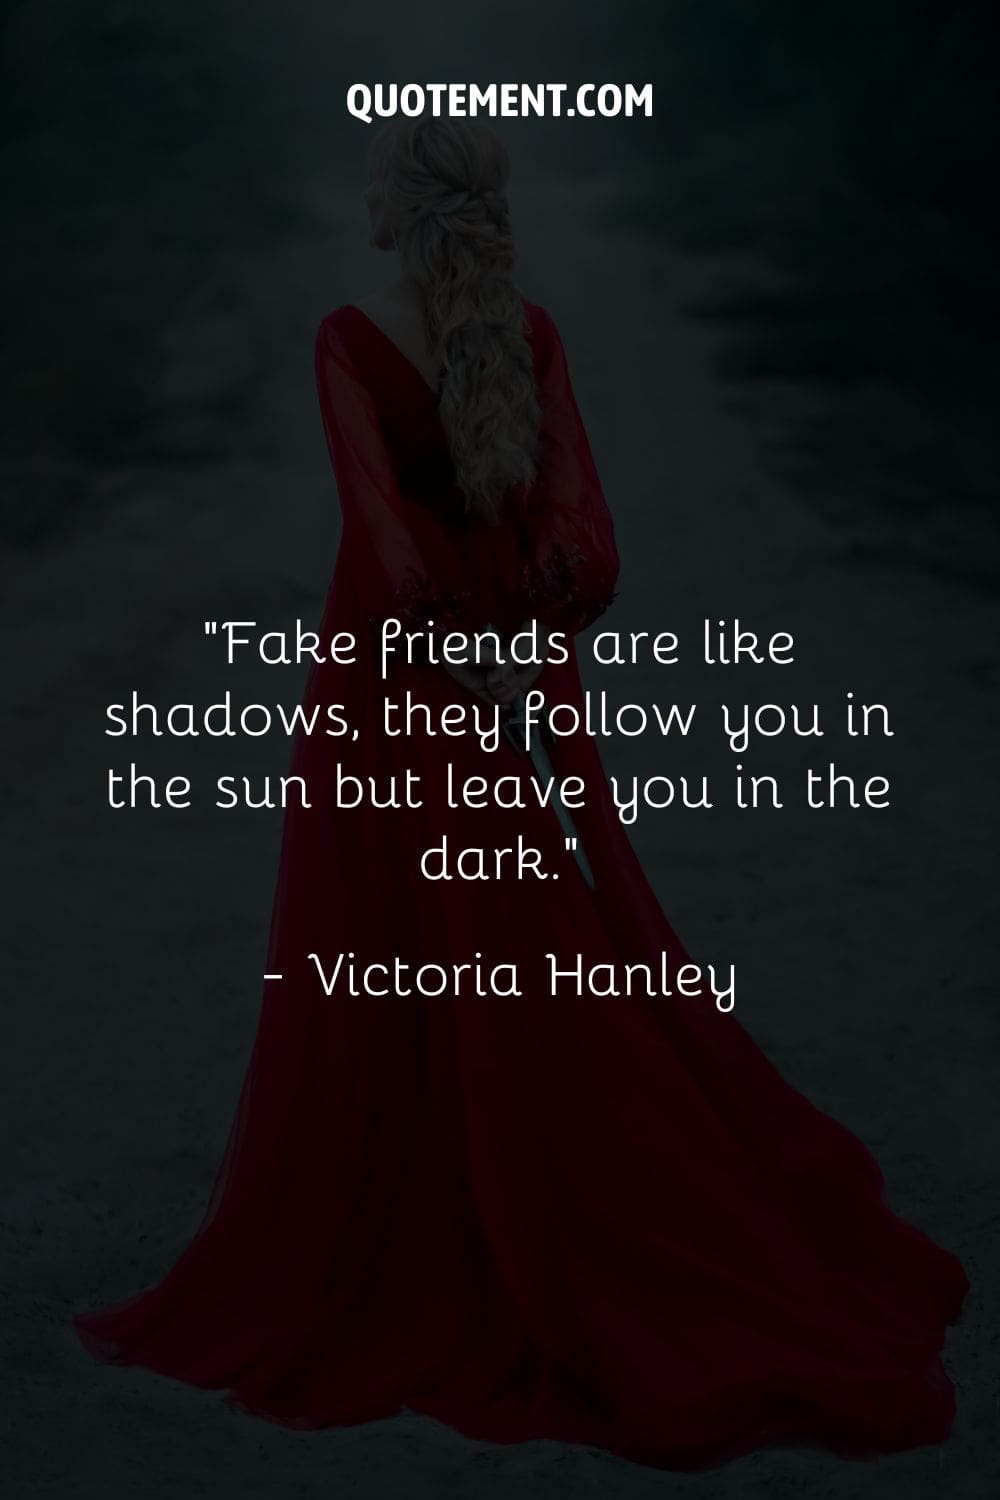 Fake friends are like shadows, they follow you in the sun but leave you in the dark.